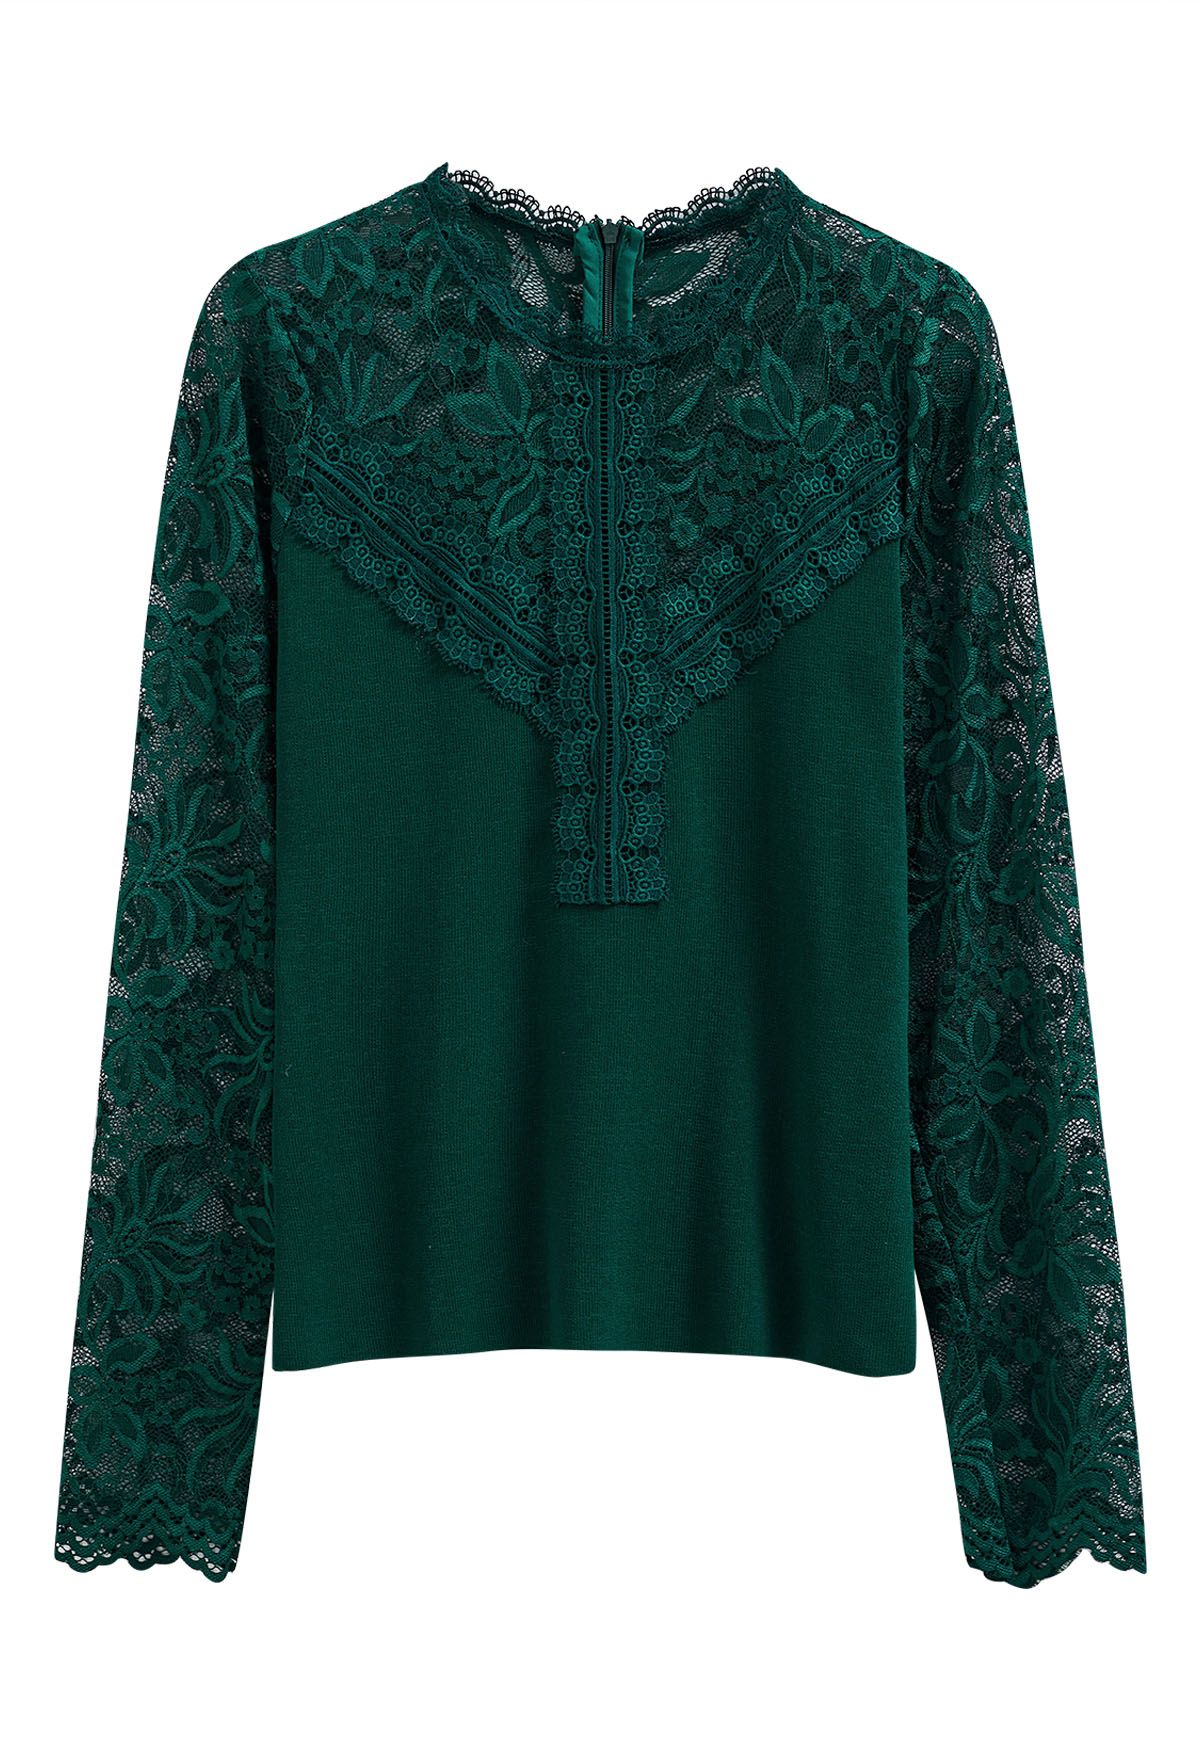 Ethereal Floral Lace Spliced Knit Top in Dark Green - Retro, Indie and  Unique Fashion